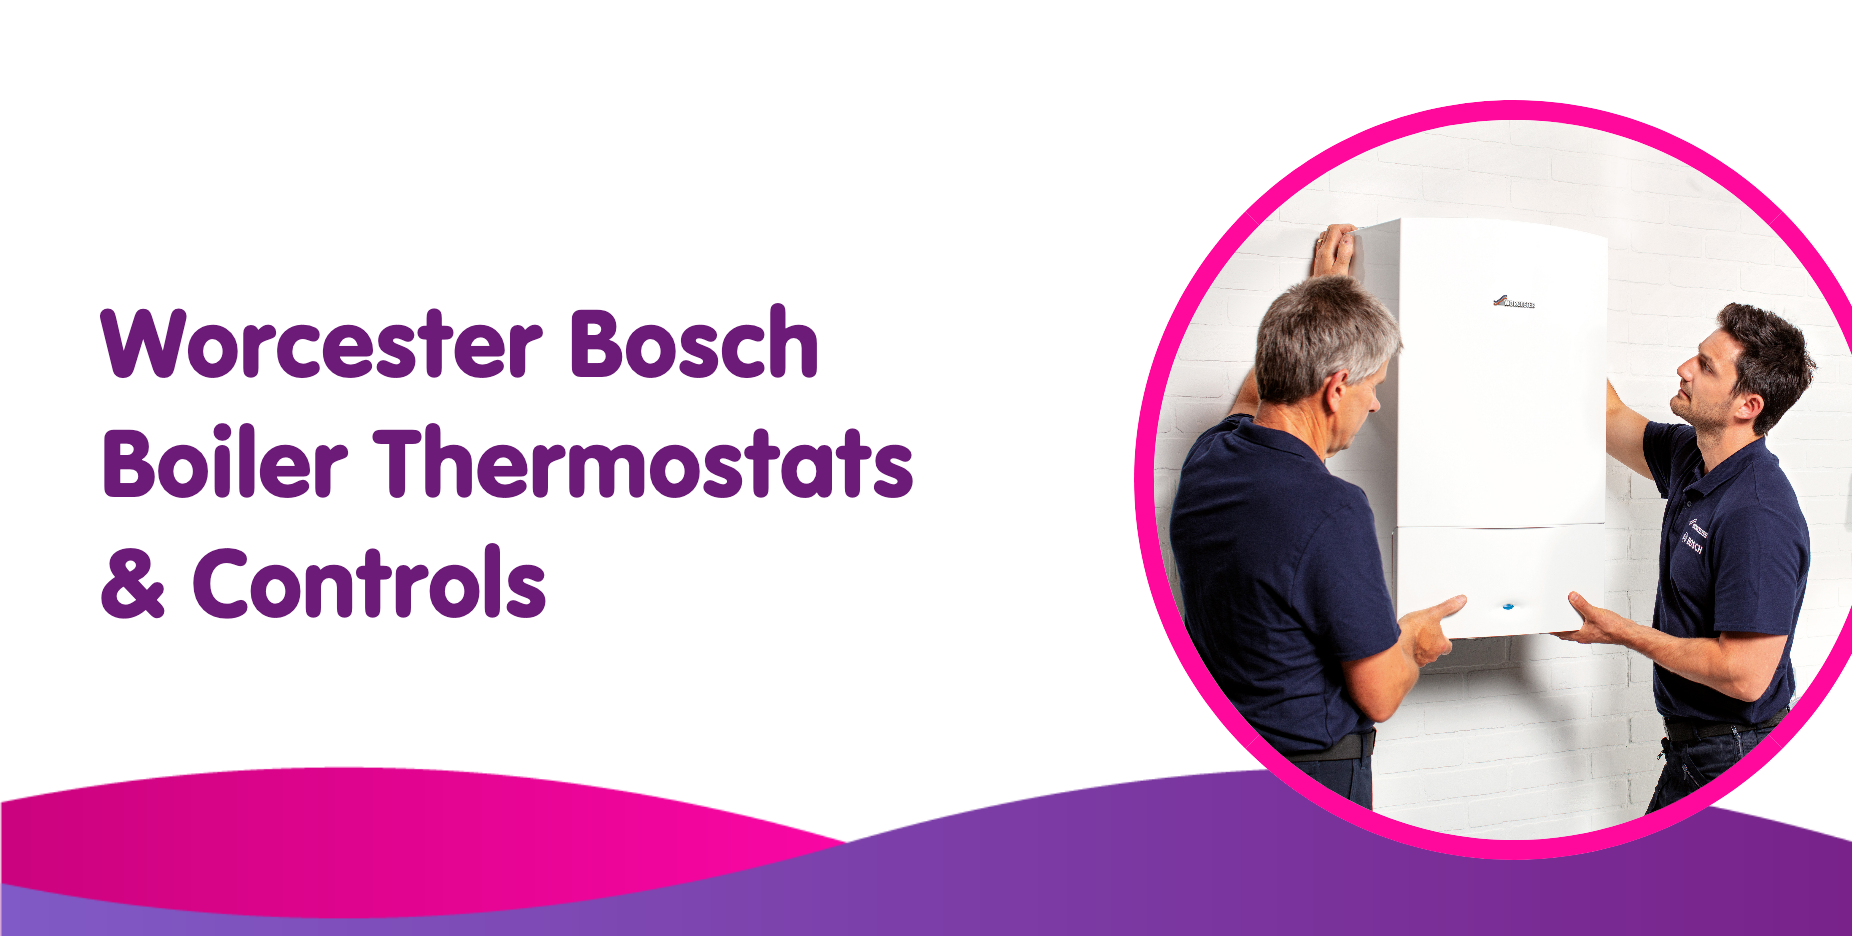 worcester bosch boiler thermostats and controls